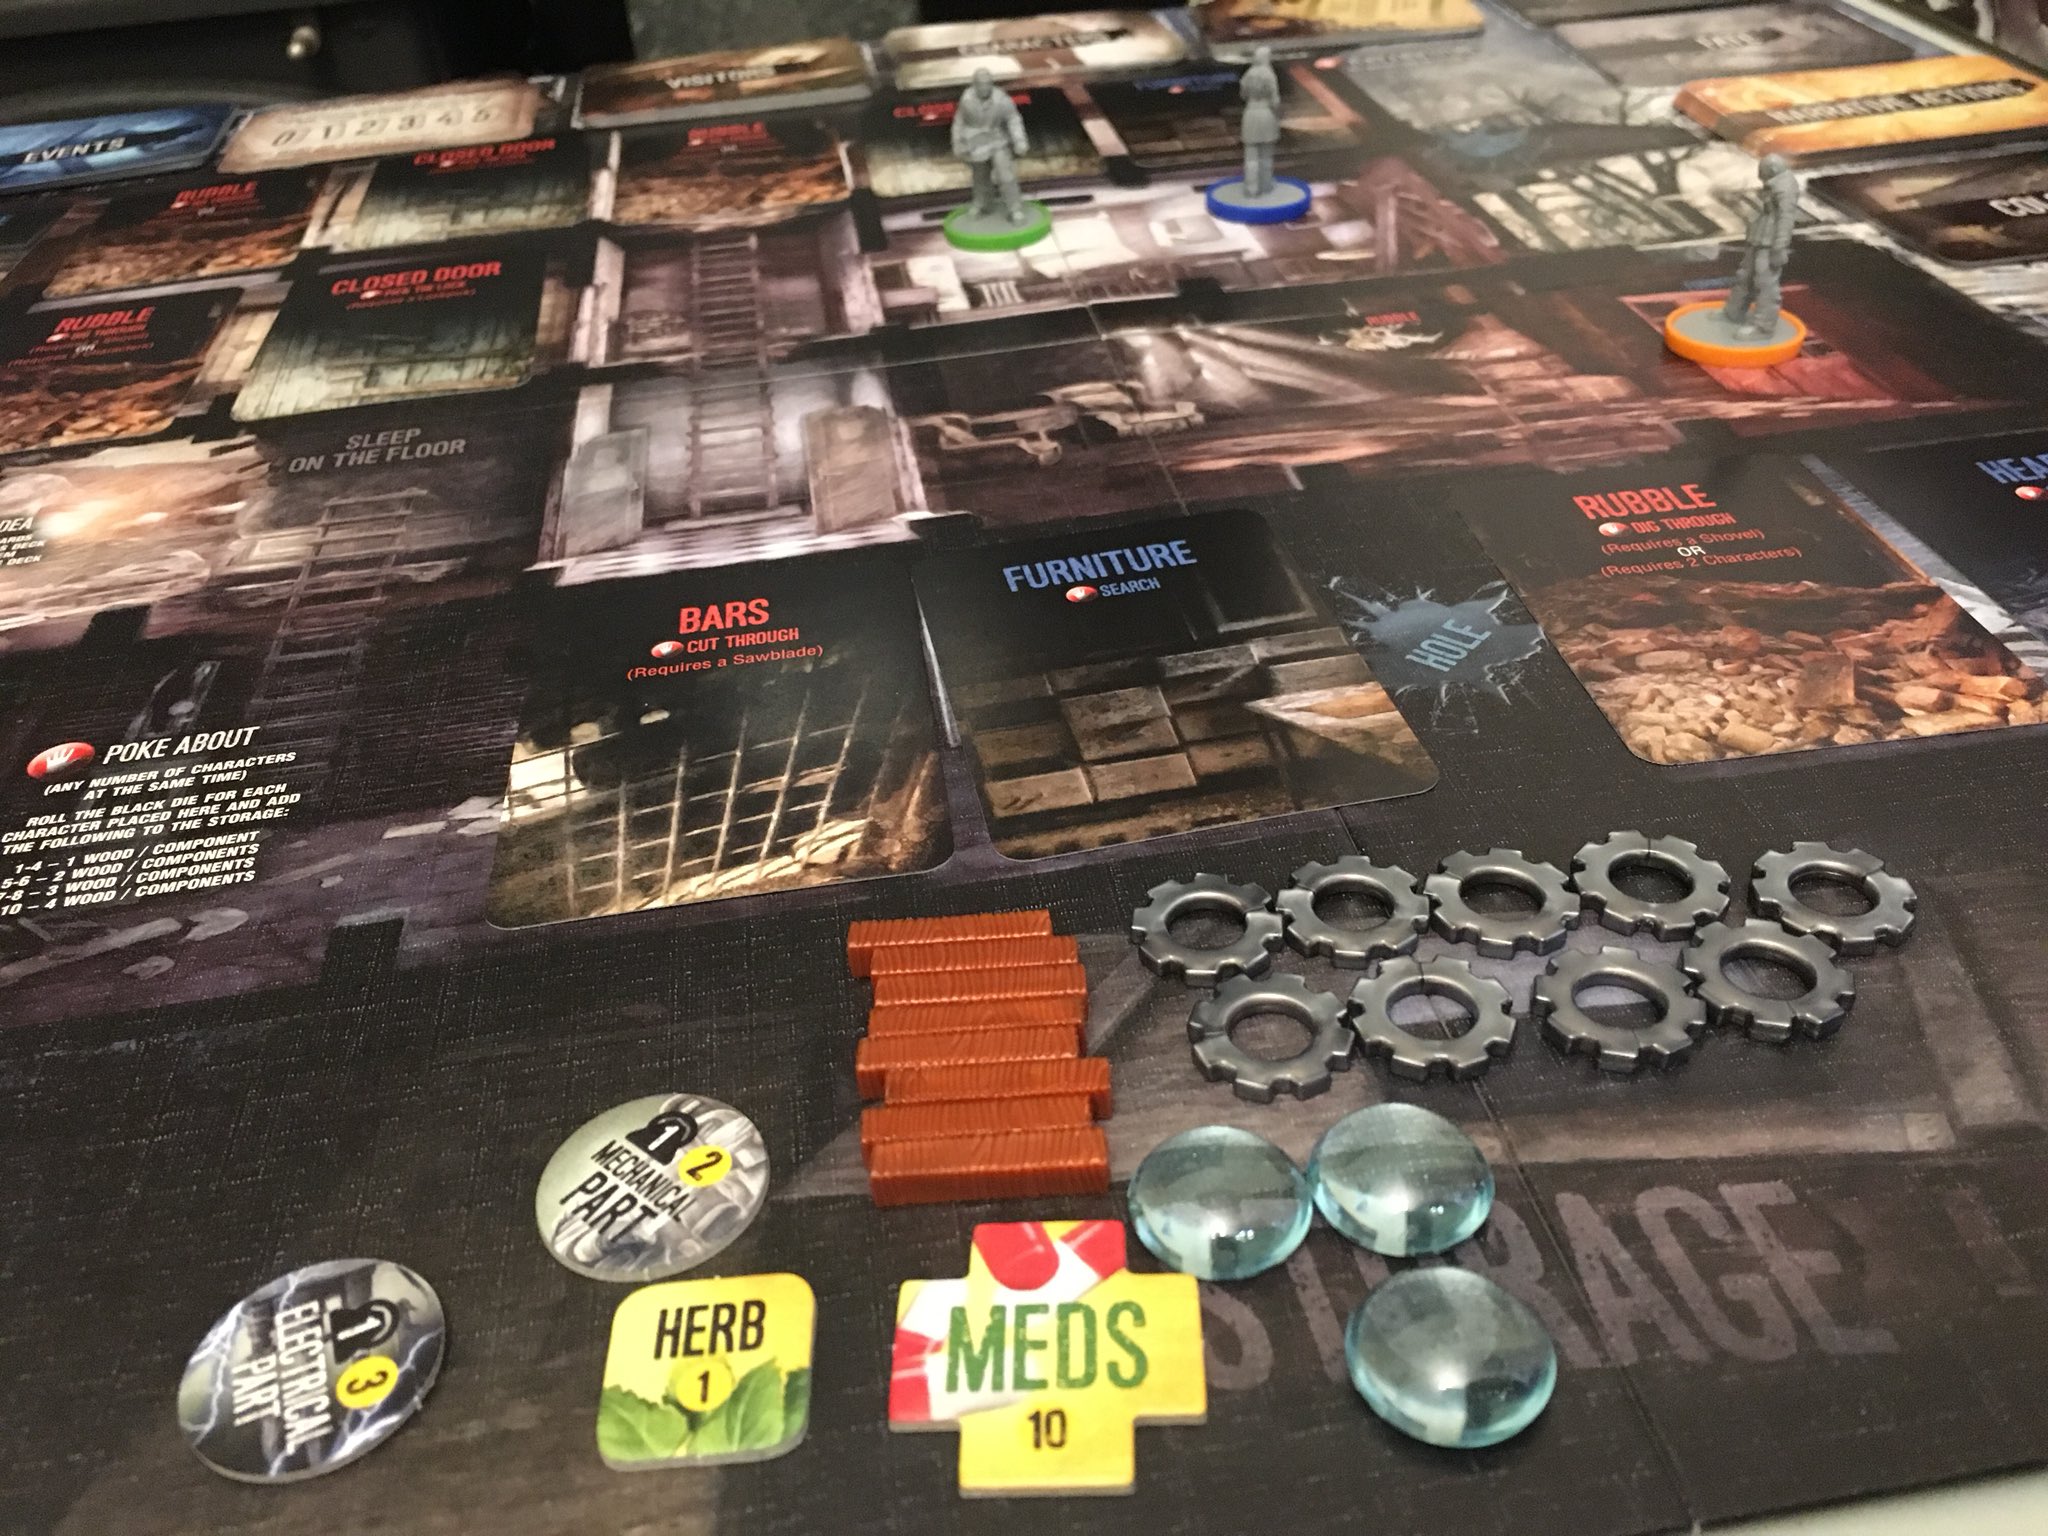 This War Of Mine TBG (@TWOM_BoardGame) / X